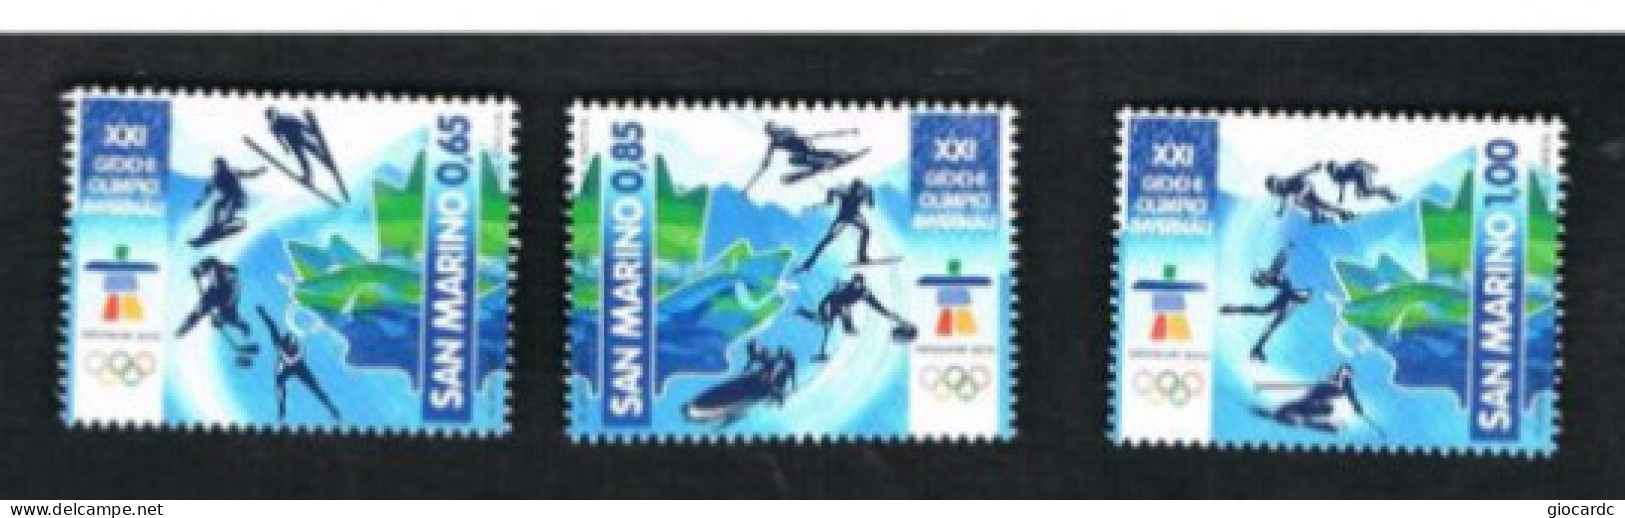 SAN MARINO - UN 2273.2275 -  2010 XXI OLIMPIADI INVERNALI A VANCOUVER (COMPLET SET OF 3 STAMPS, BY BF) - MINT** - Ongebruikt